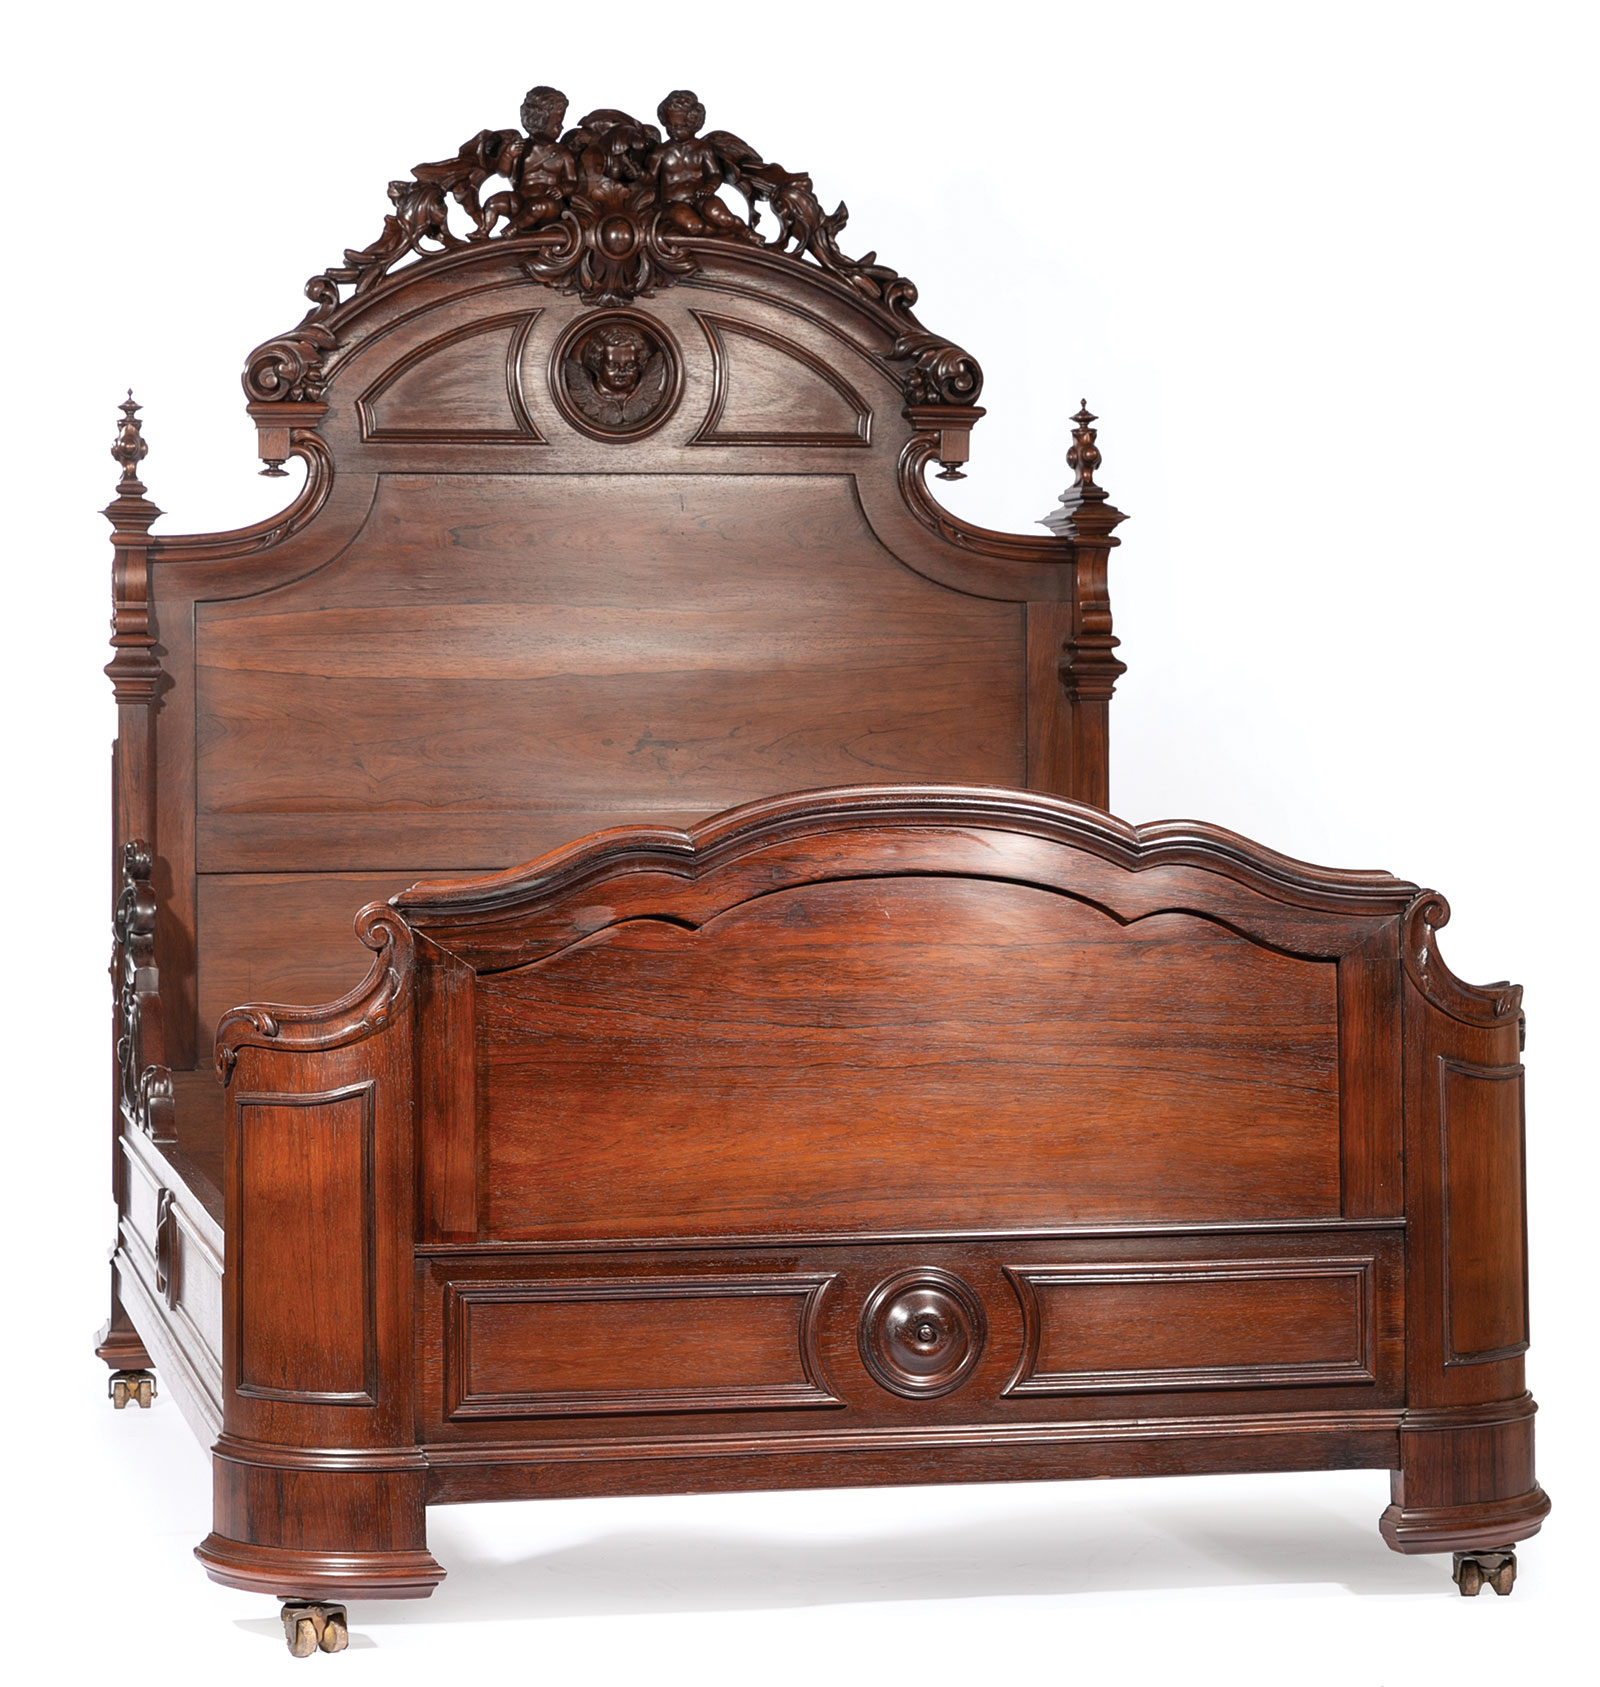 Very Fine American Carved Rosewood Bedroom Suite , mid-19th c., labeled A. (Alexander) Roux, incl. - Image 18 of 20